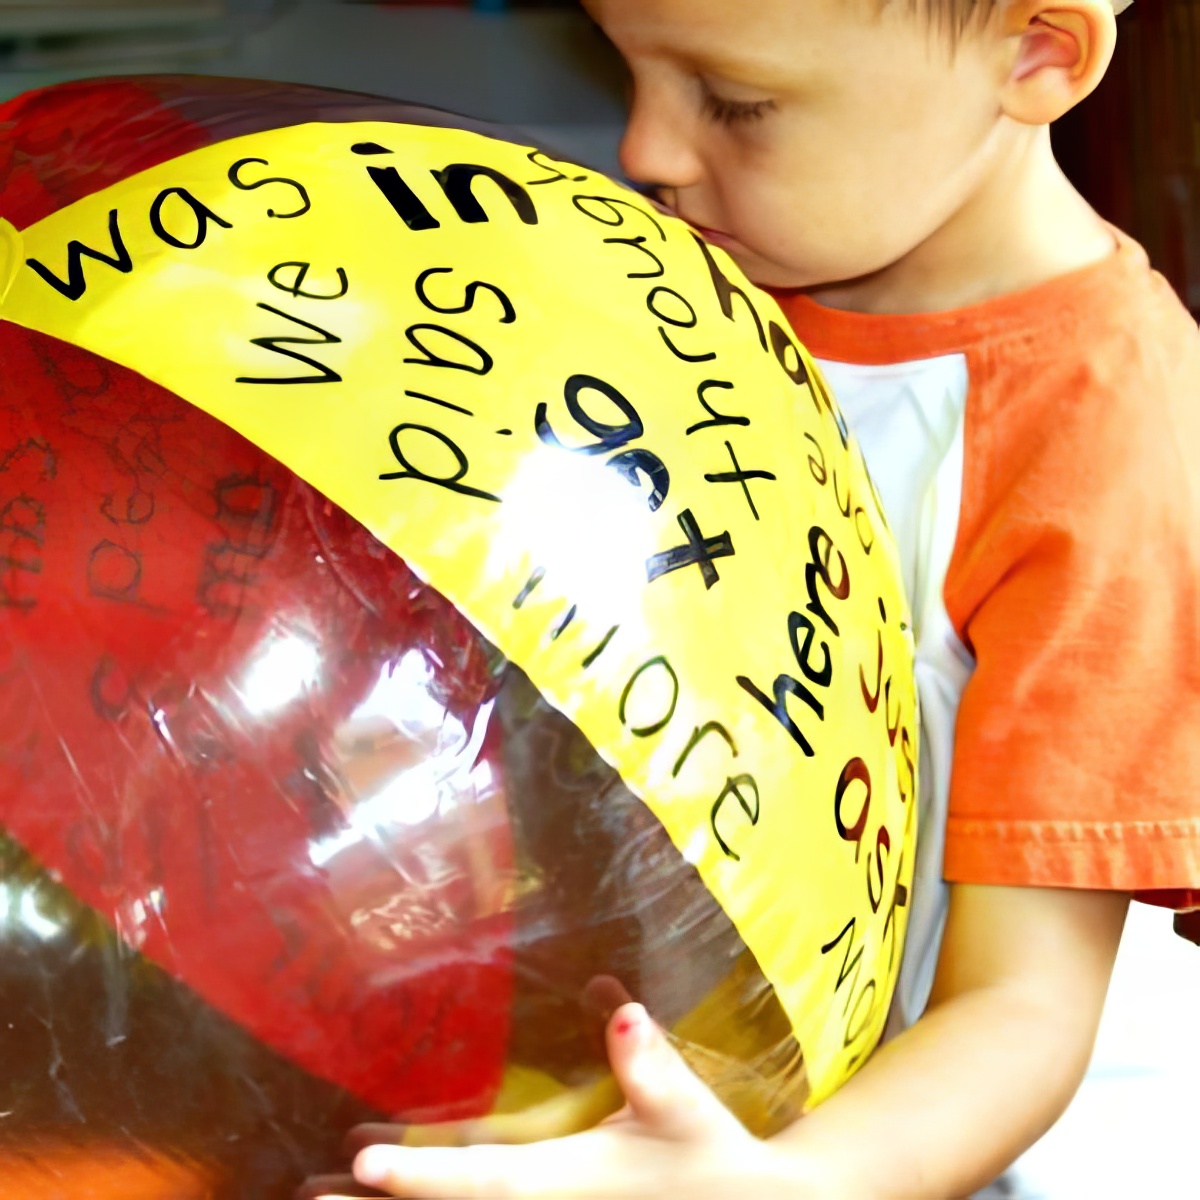 Sight-Word-Ball, Phonics Games and Activities for toddlers, phonics activities for your kids